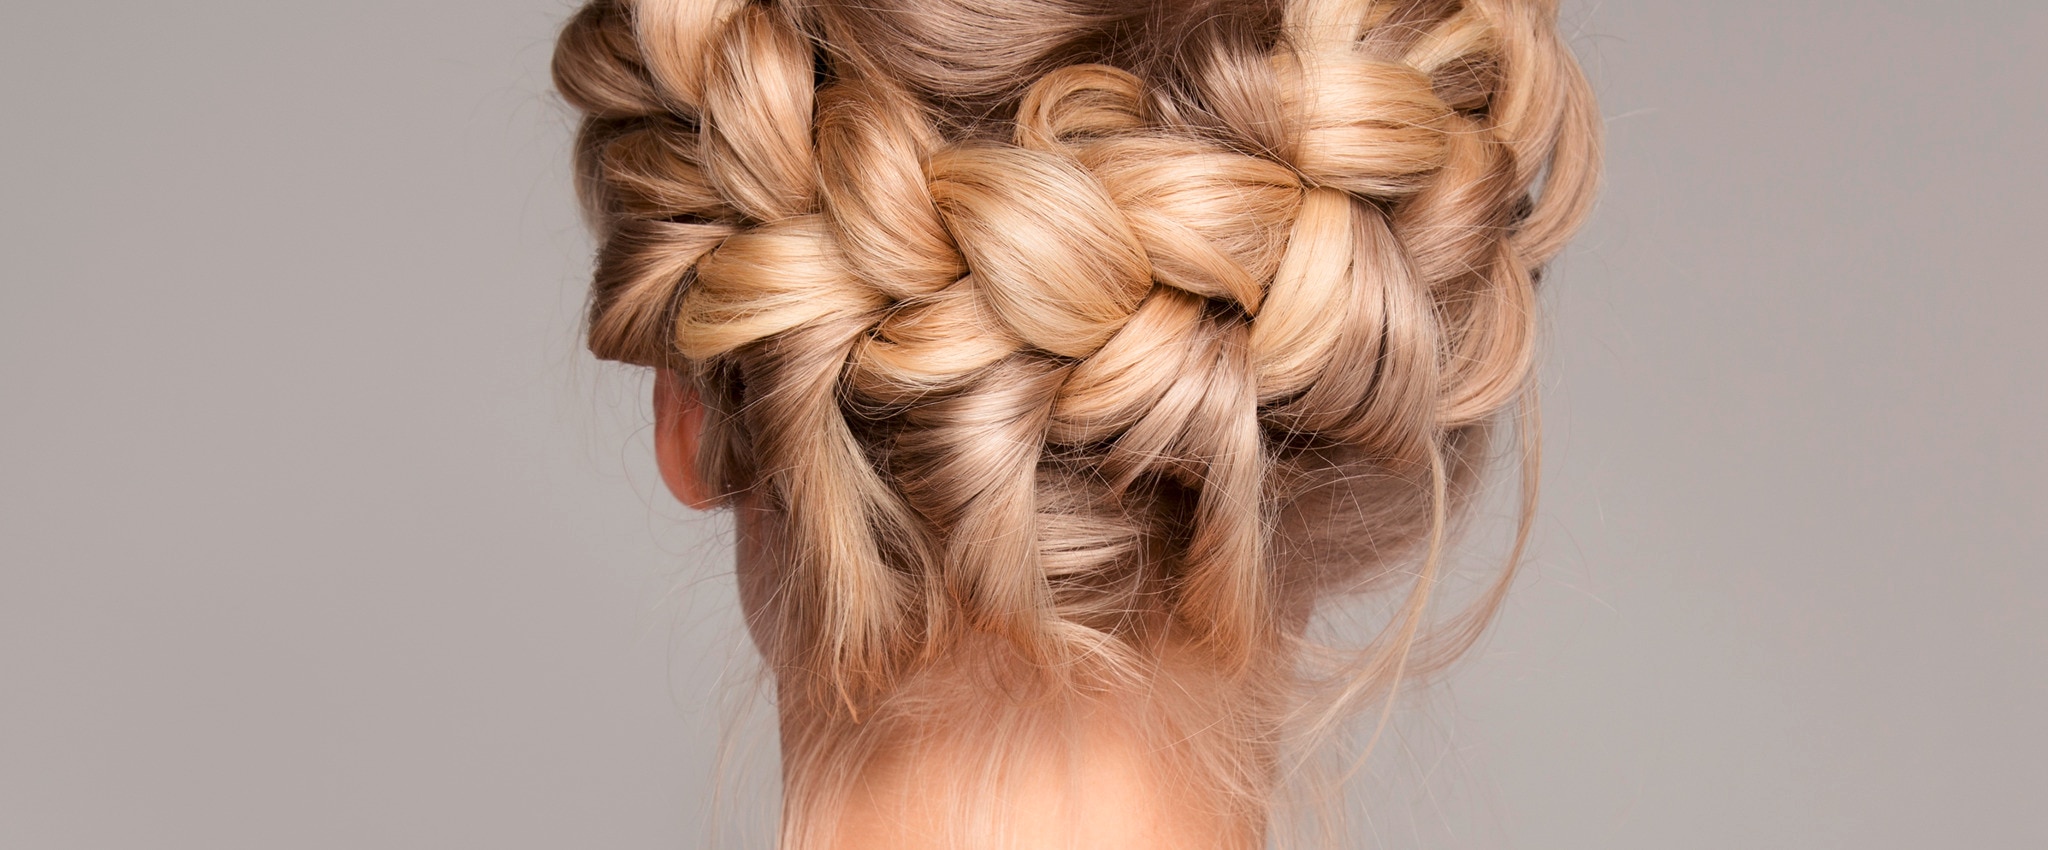 5 Power Hairstyles That Will Wow in *Any* Interview | Interview hairstyles,  Hair job, Job interview hairstyles